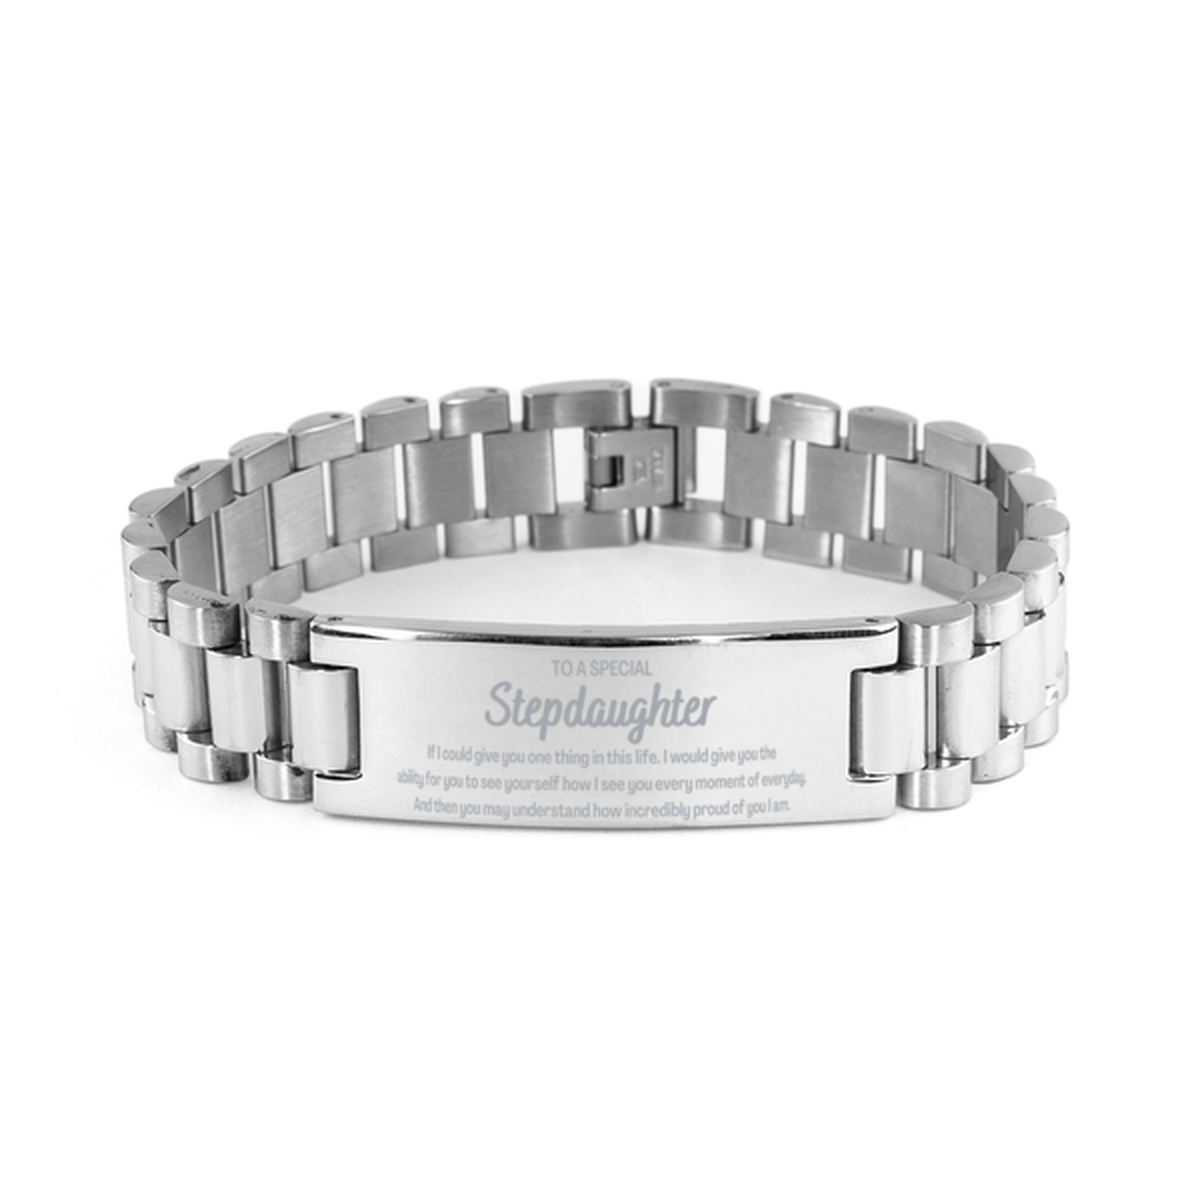 To My Stepdaughter Ladder Stainless Steel Bracelet, Gifts For Stepdaughter Engraved, Inspirational Gifts for Christmas Birthday, Epic Gifts for Stepdaughter To A Special Stepdaughter how incredibly proud of you I am